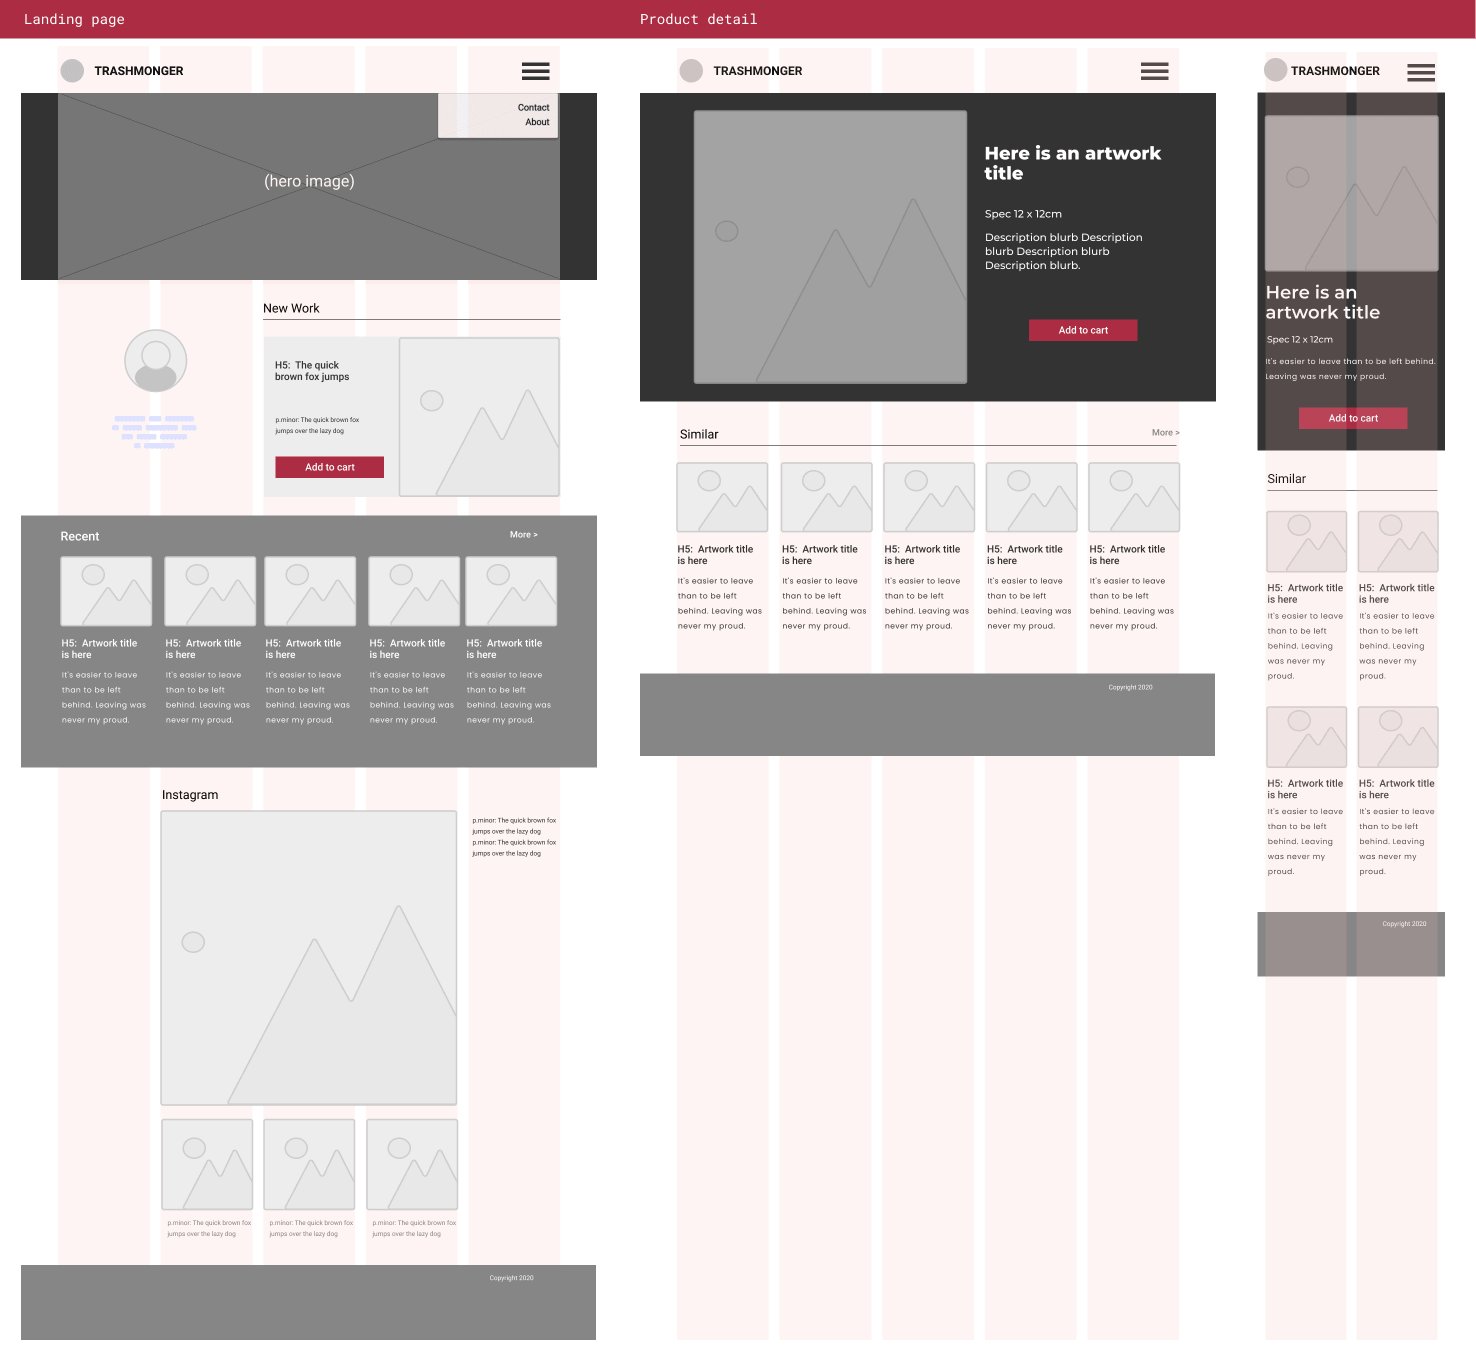 Wireframes for the landing and product pages